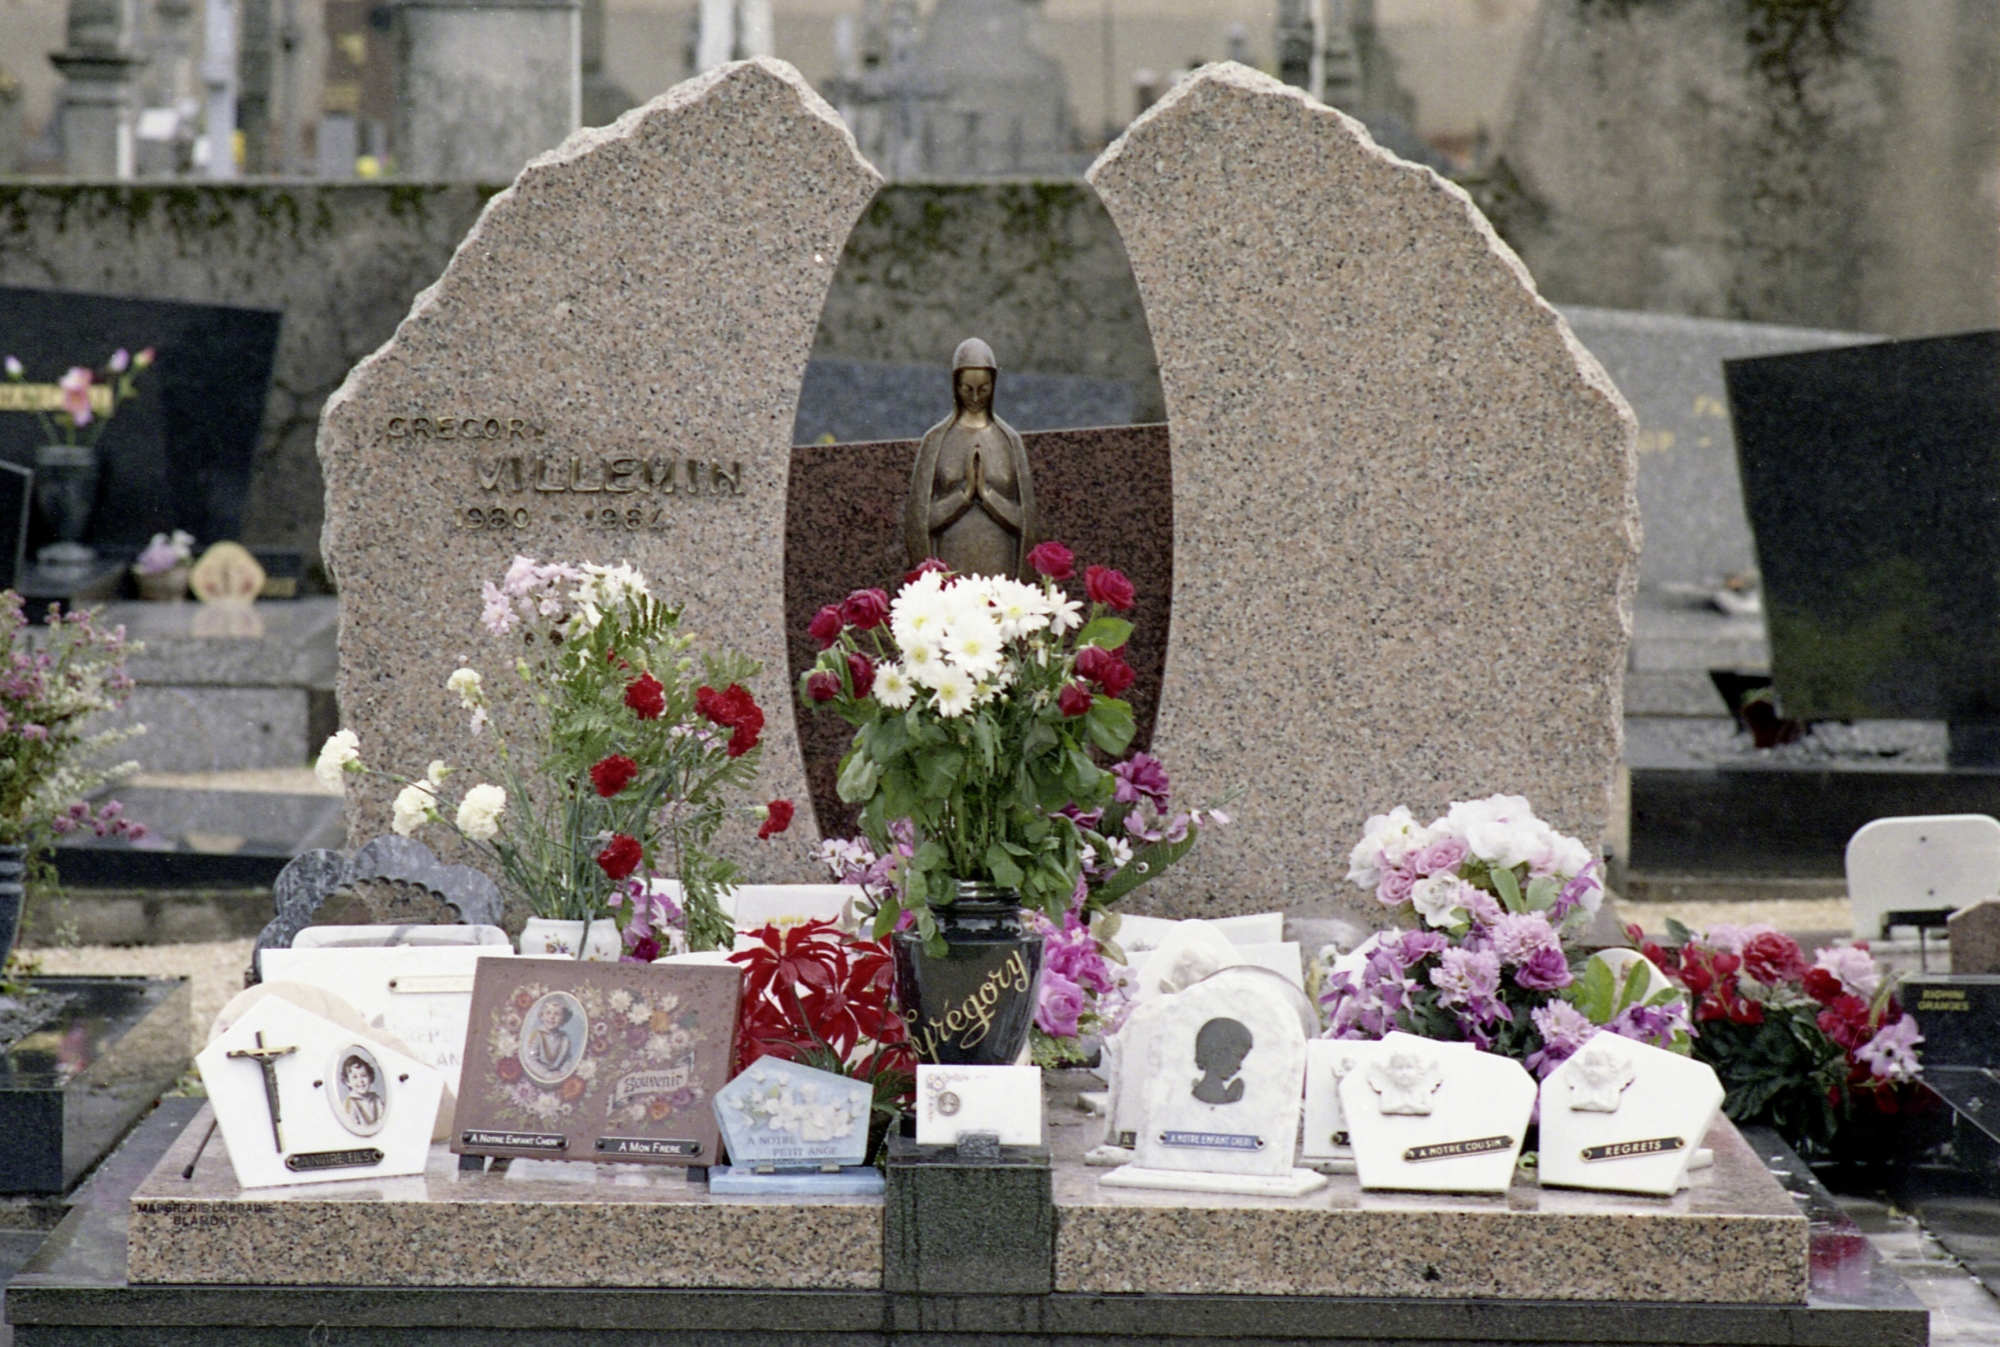 The grave of Grégory Villemin is seen in a village cemetery in Lepanges-sur-Vologne, south-west France in 1987. Grégory Villemin was found dead in the Vologne River in Eastern France on Oct. 16, 1984. (AP Photo/Michel Lipichitz) France Gregory Villemin